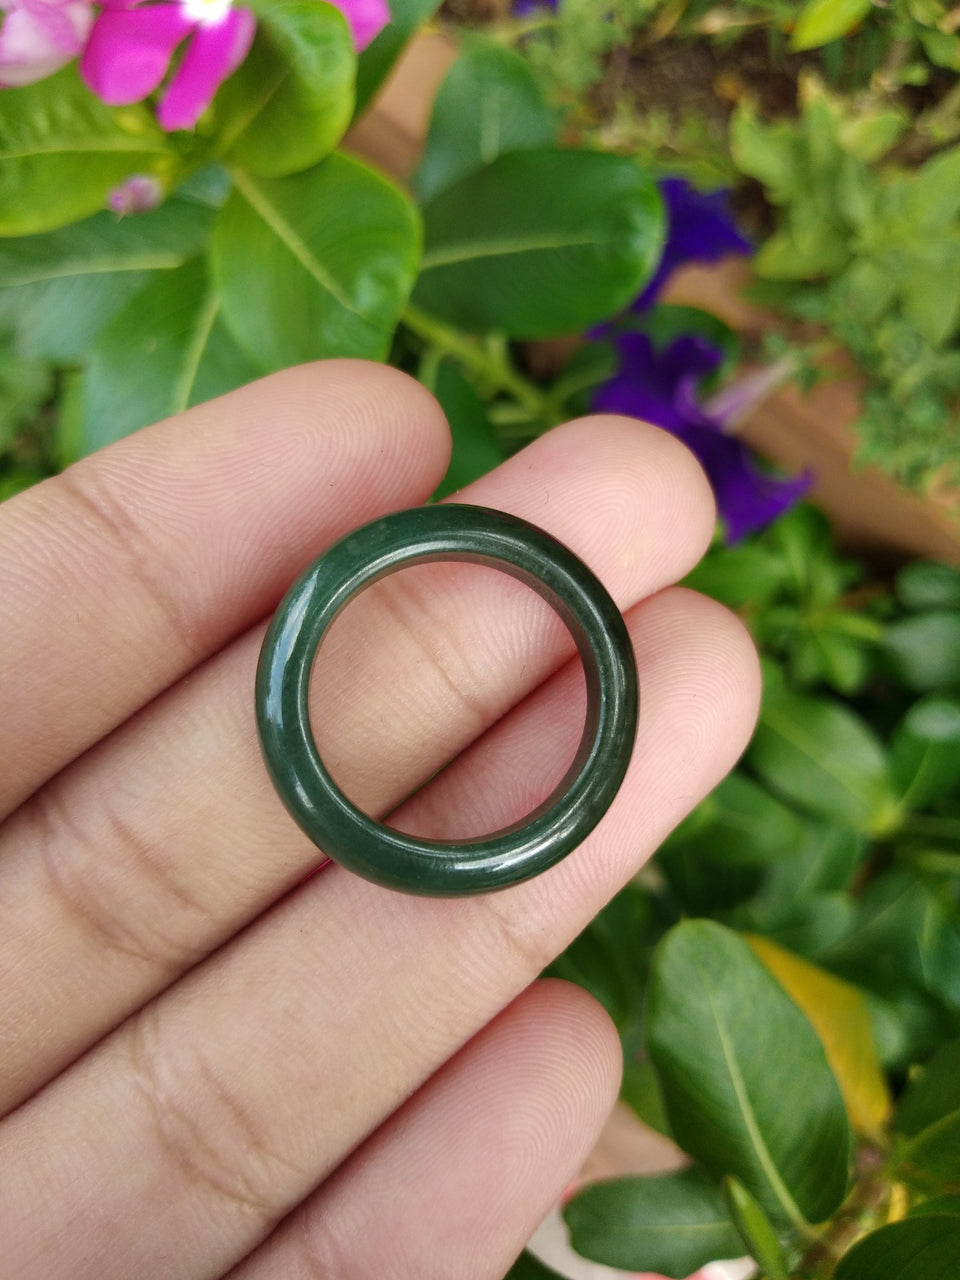 Natural Jadeite Jade ring Thailand jewelry stone mineral size  7.75 US  EB 067